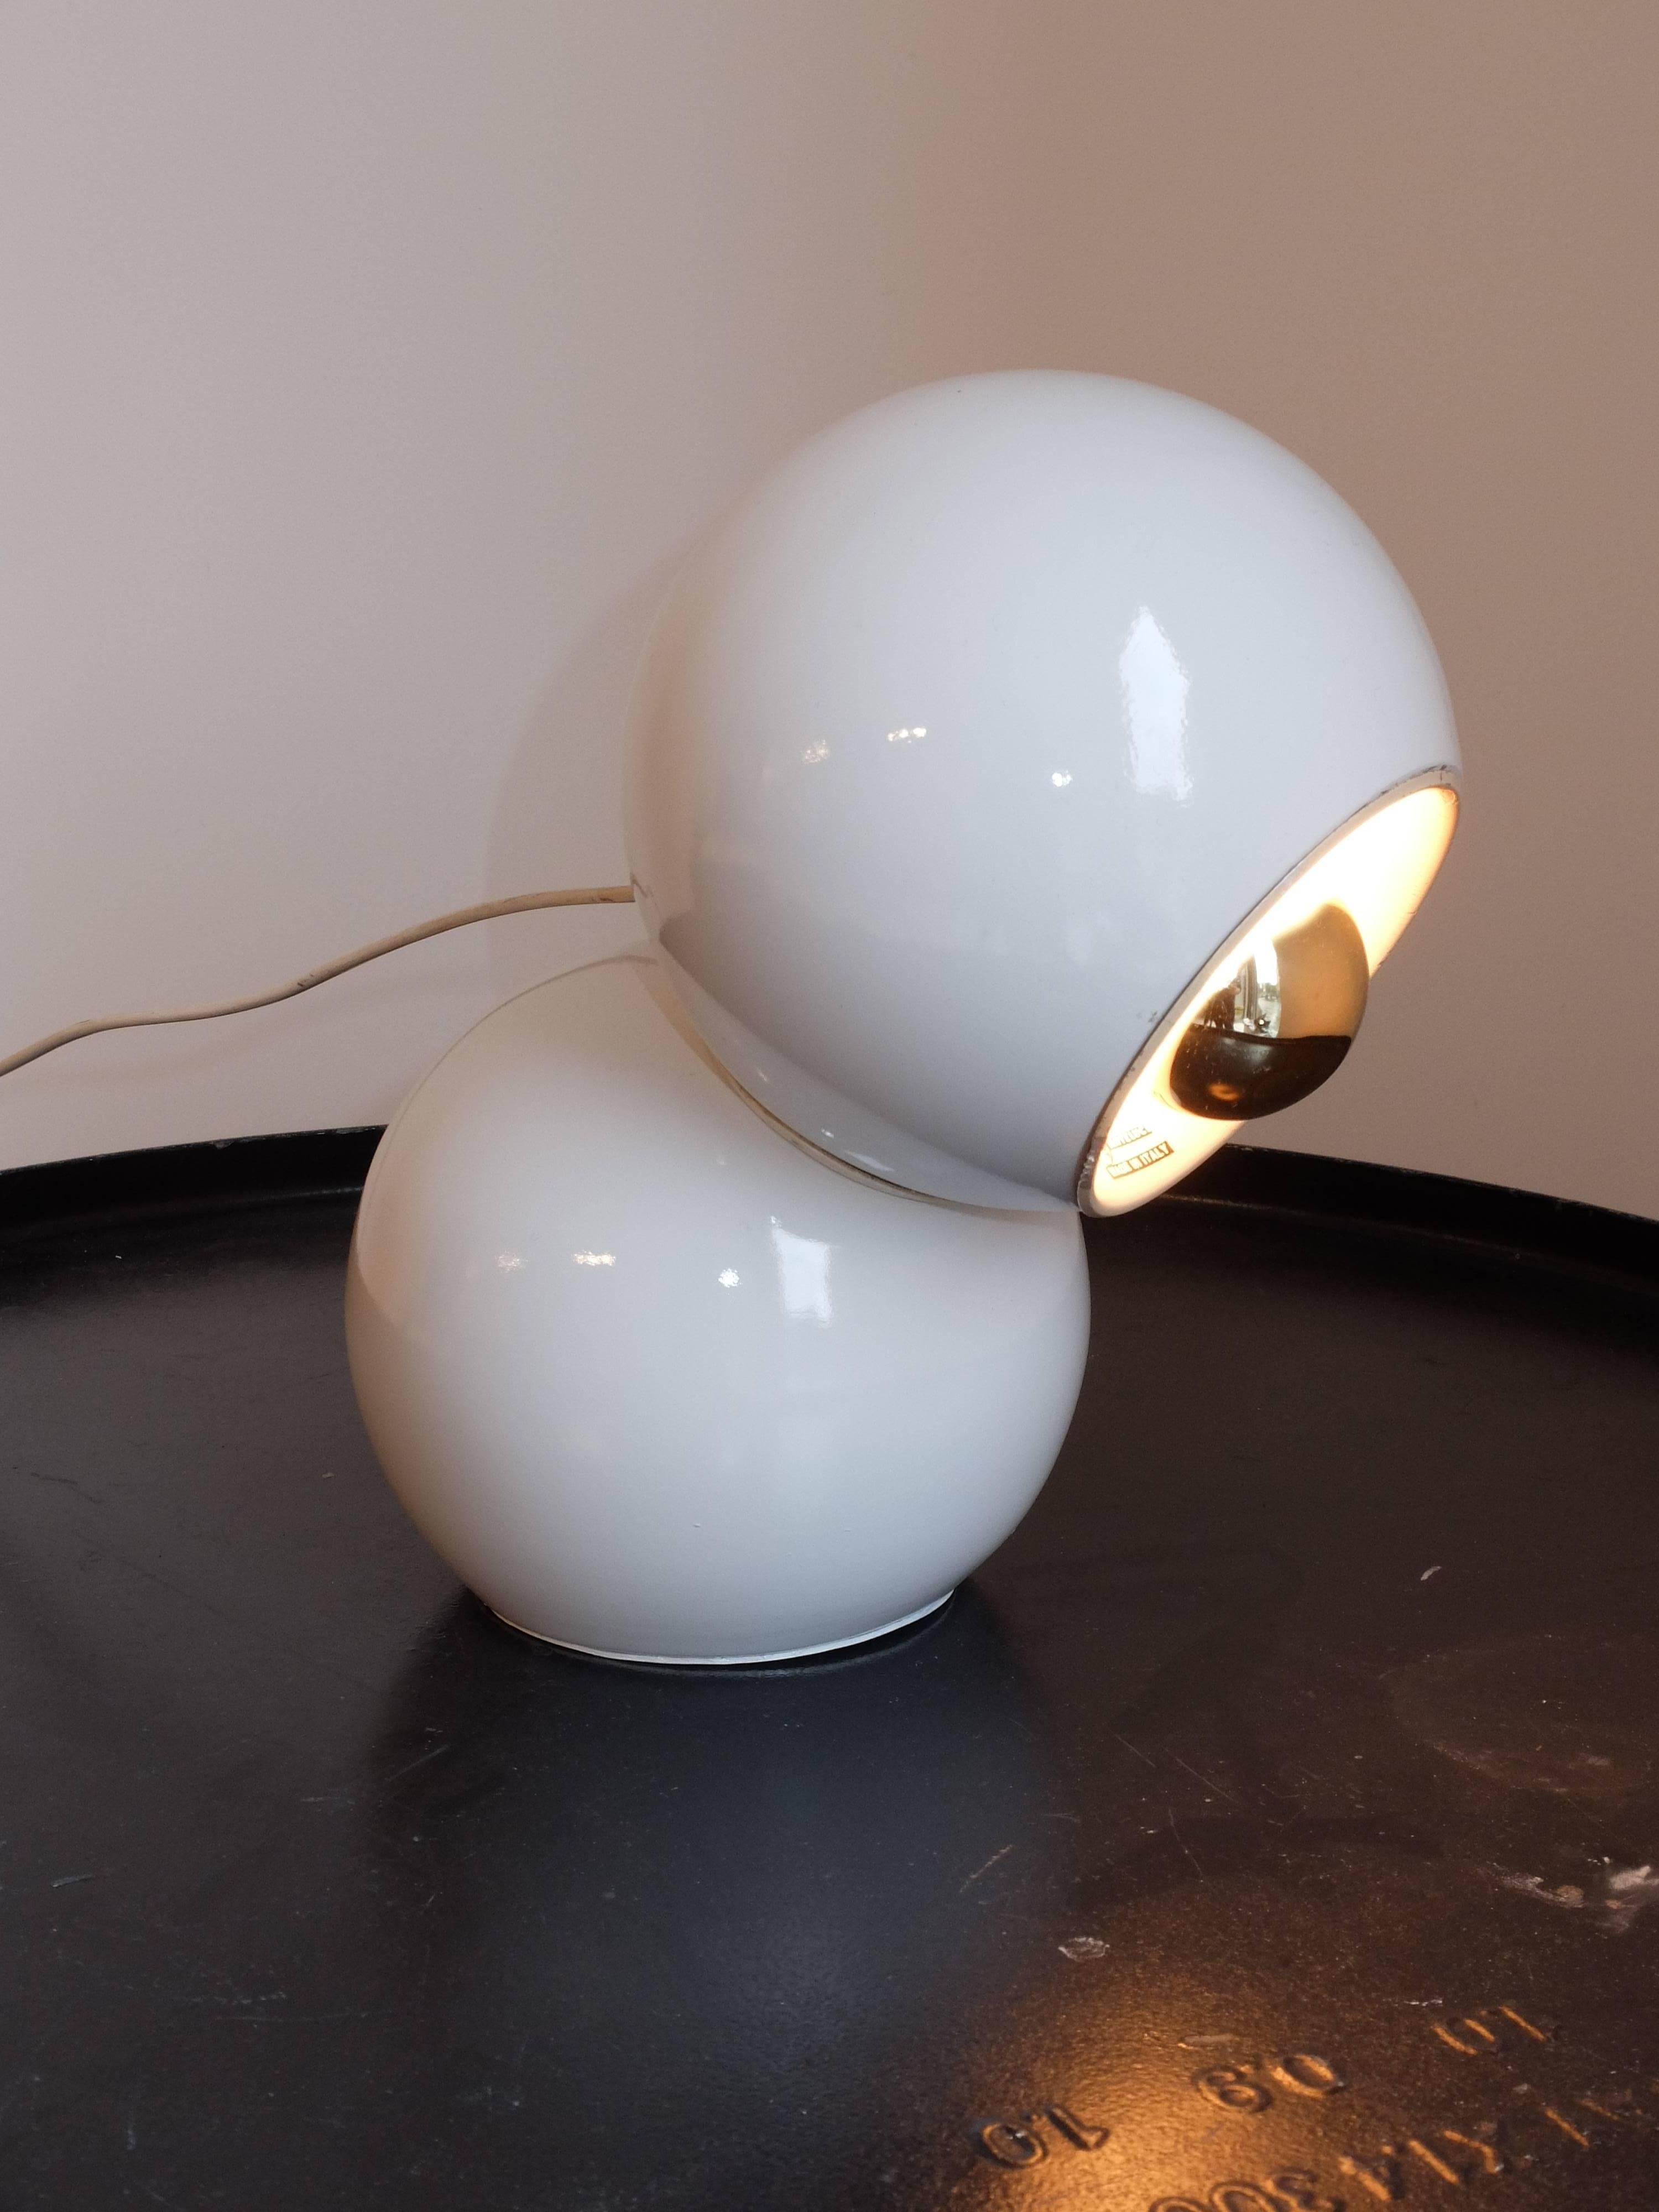 Arteluce table lamp 541 made of white lacquered metal with double-lobed body composed of two magnetic sections set in a weighted metal base.
Magnetic. 
Références:
Clémence & Didier Krzentowski, The complete Designers’ lights (1950-1990), JRP